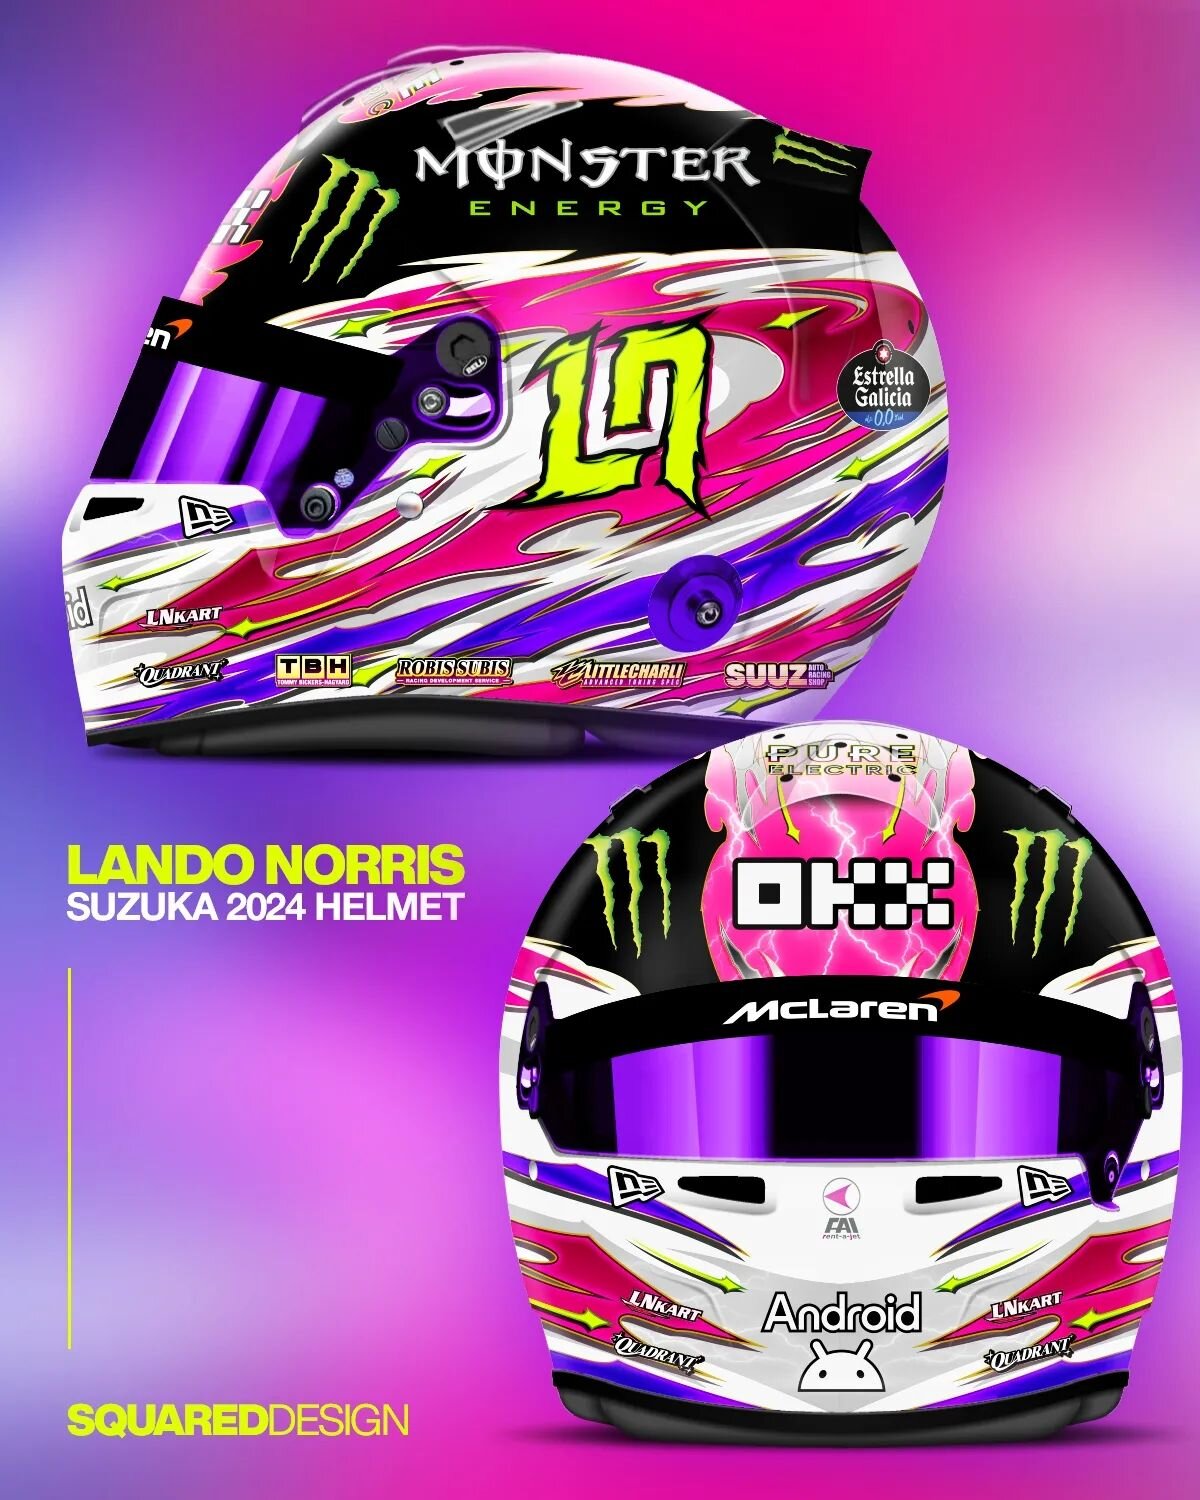 So here it is, the coolest project I've worked on to date - Lando Norris' 2024 Japanese Grand Prix special helmet!

I practically got to design the whole thing from the ground up, which was amazing! A Japanese drifting style-inspired design with my o